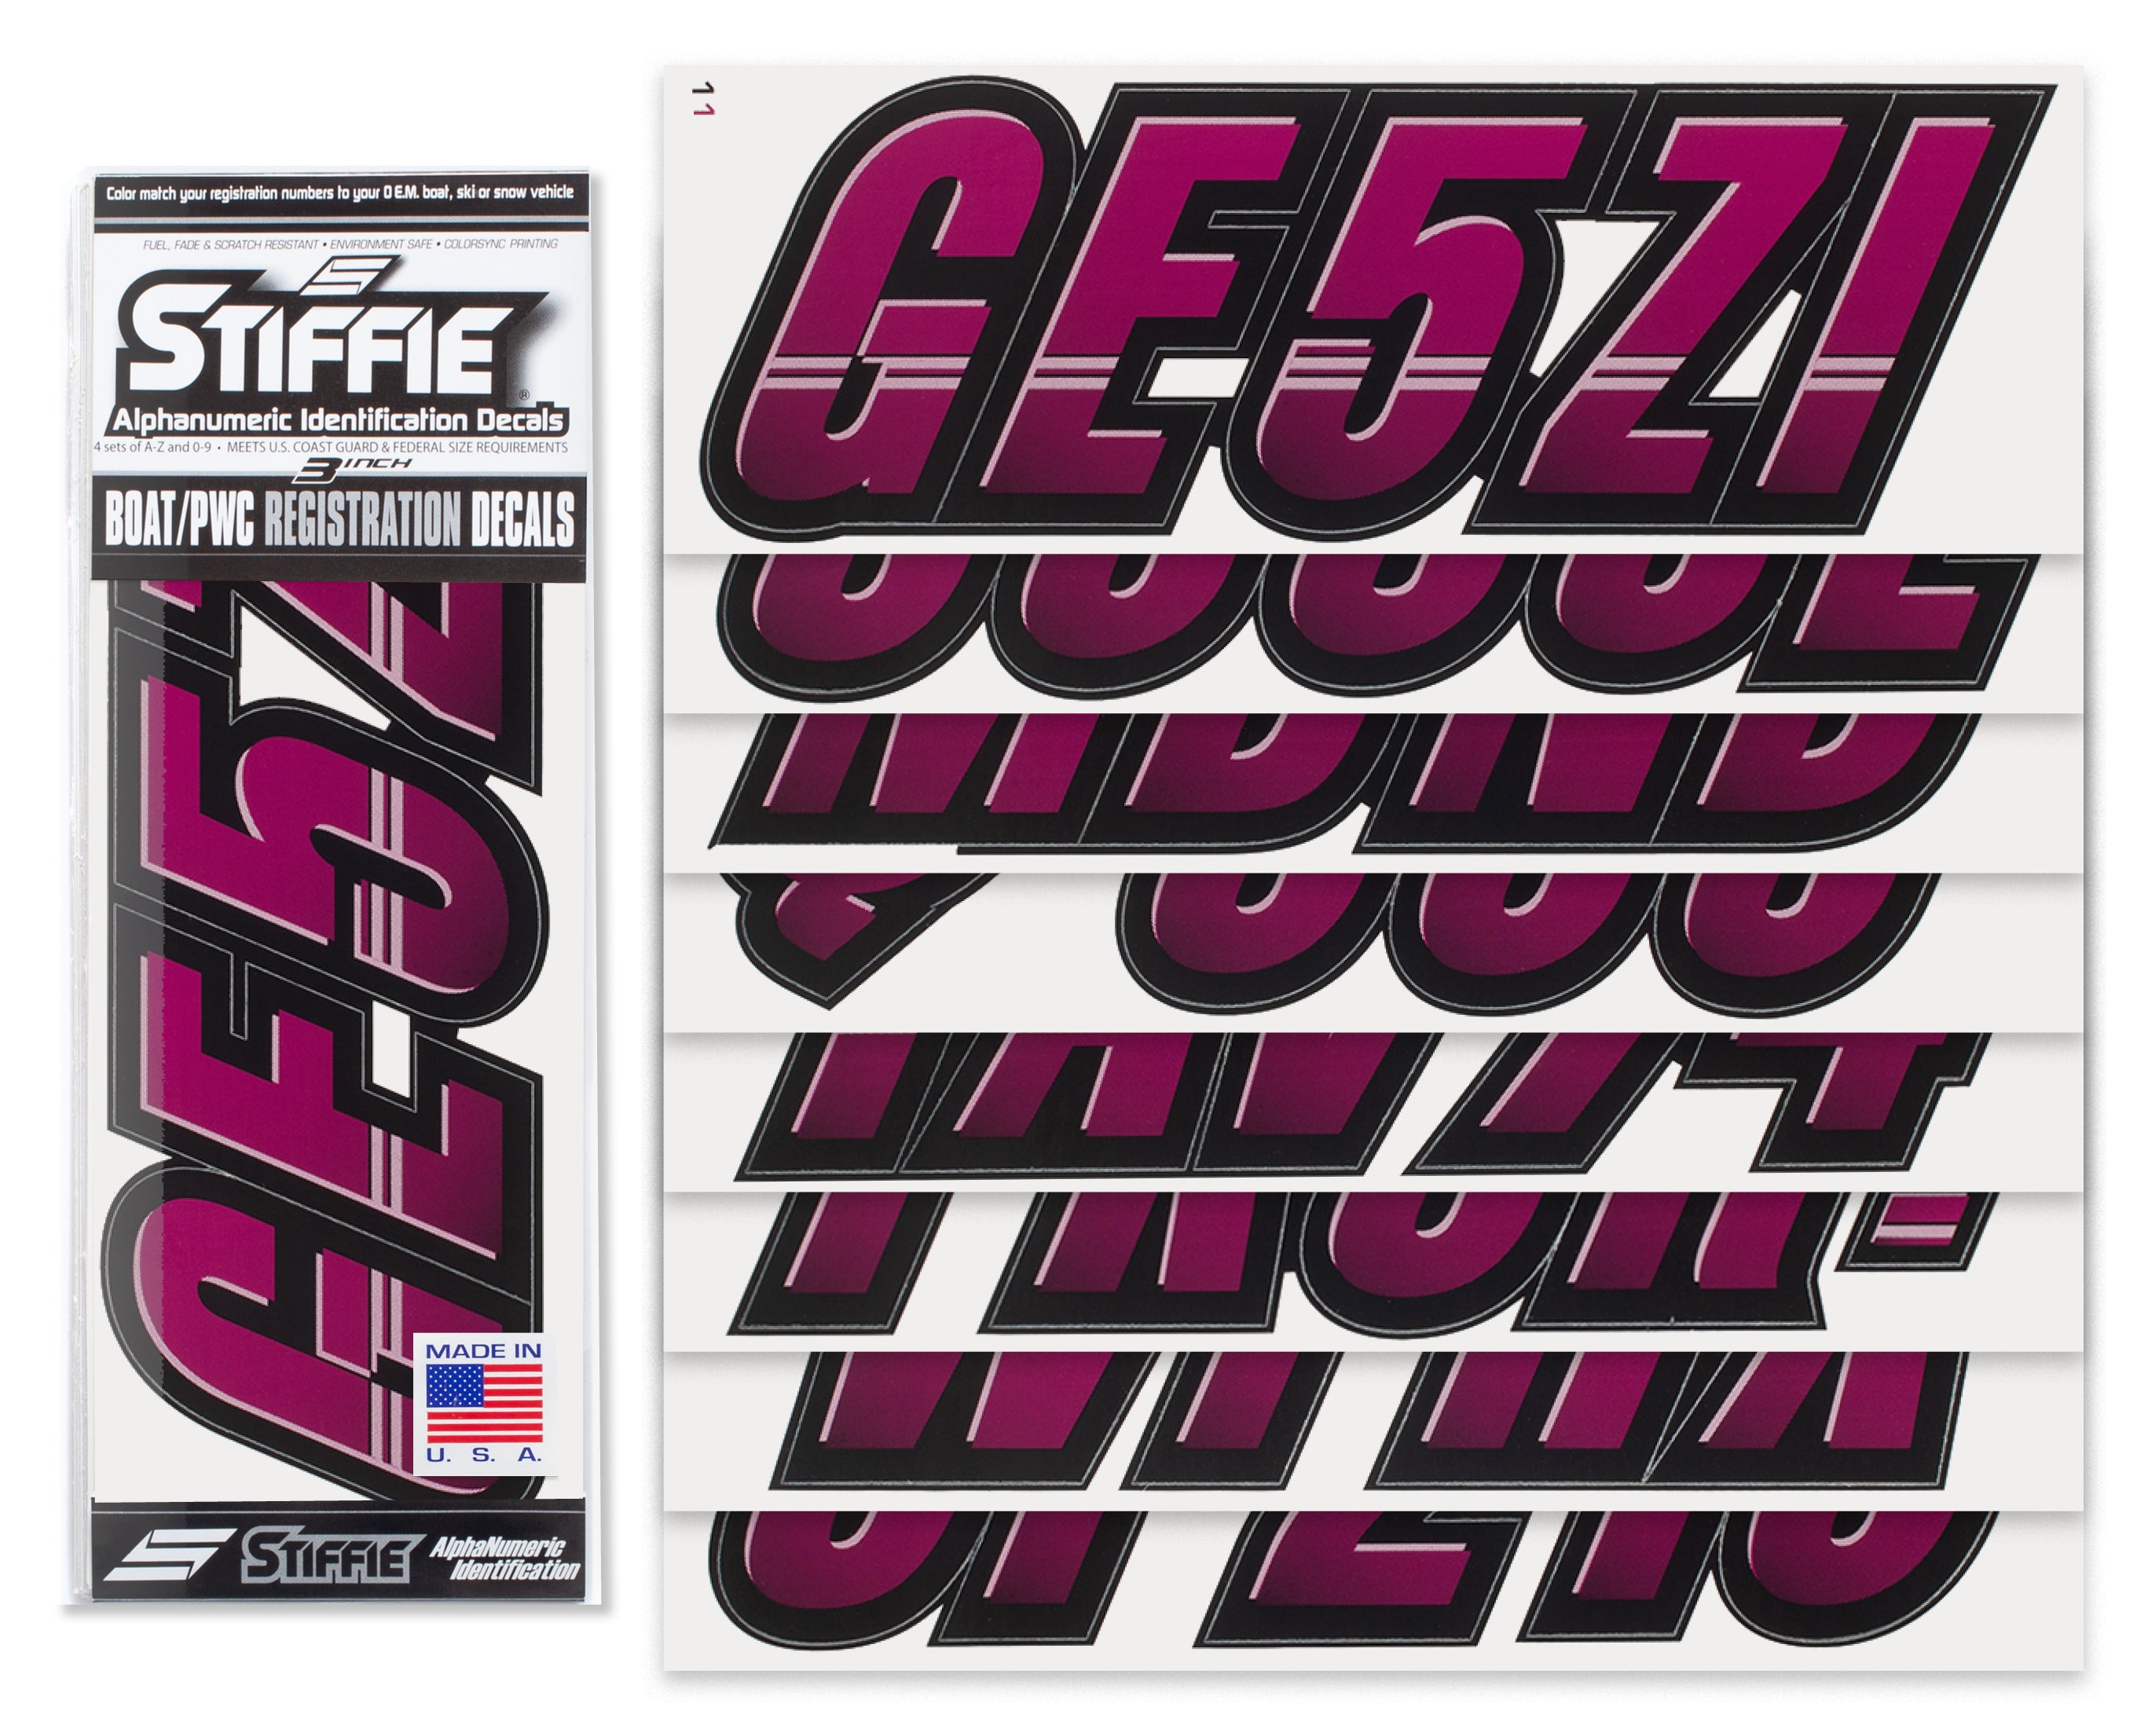 Stiffie Techtron Wine/Black 3" Alpha-Numeric Registration Identification Numbers Stickers Decals for Boats & Personal Watercraft